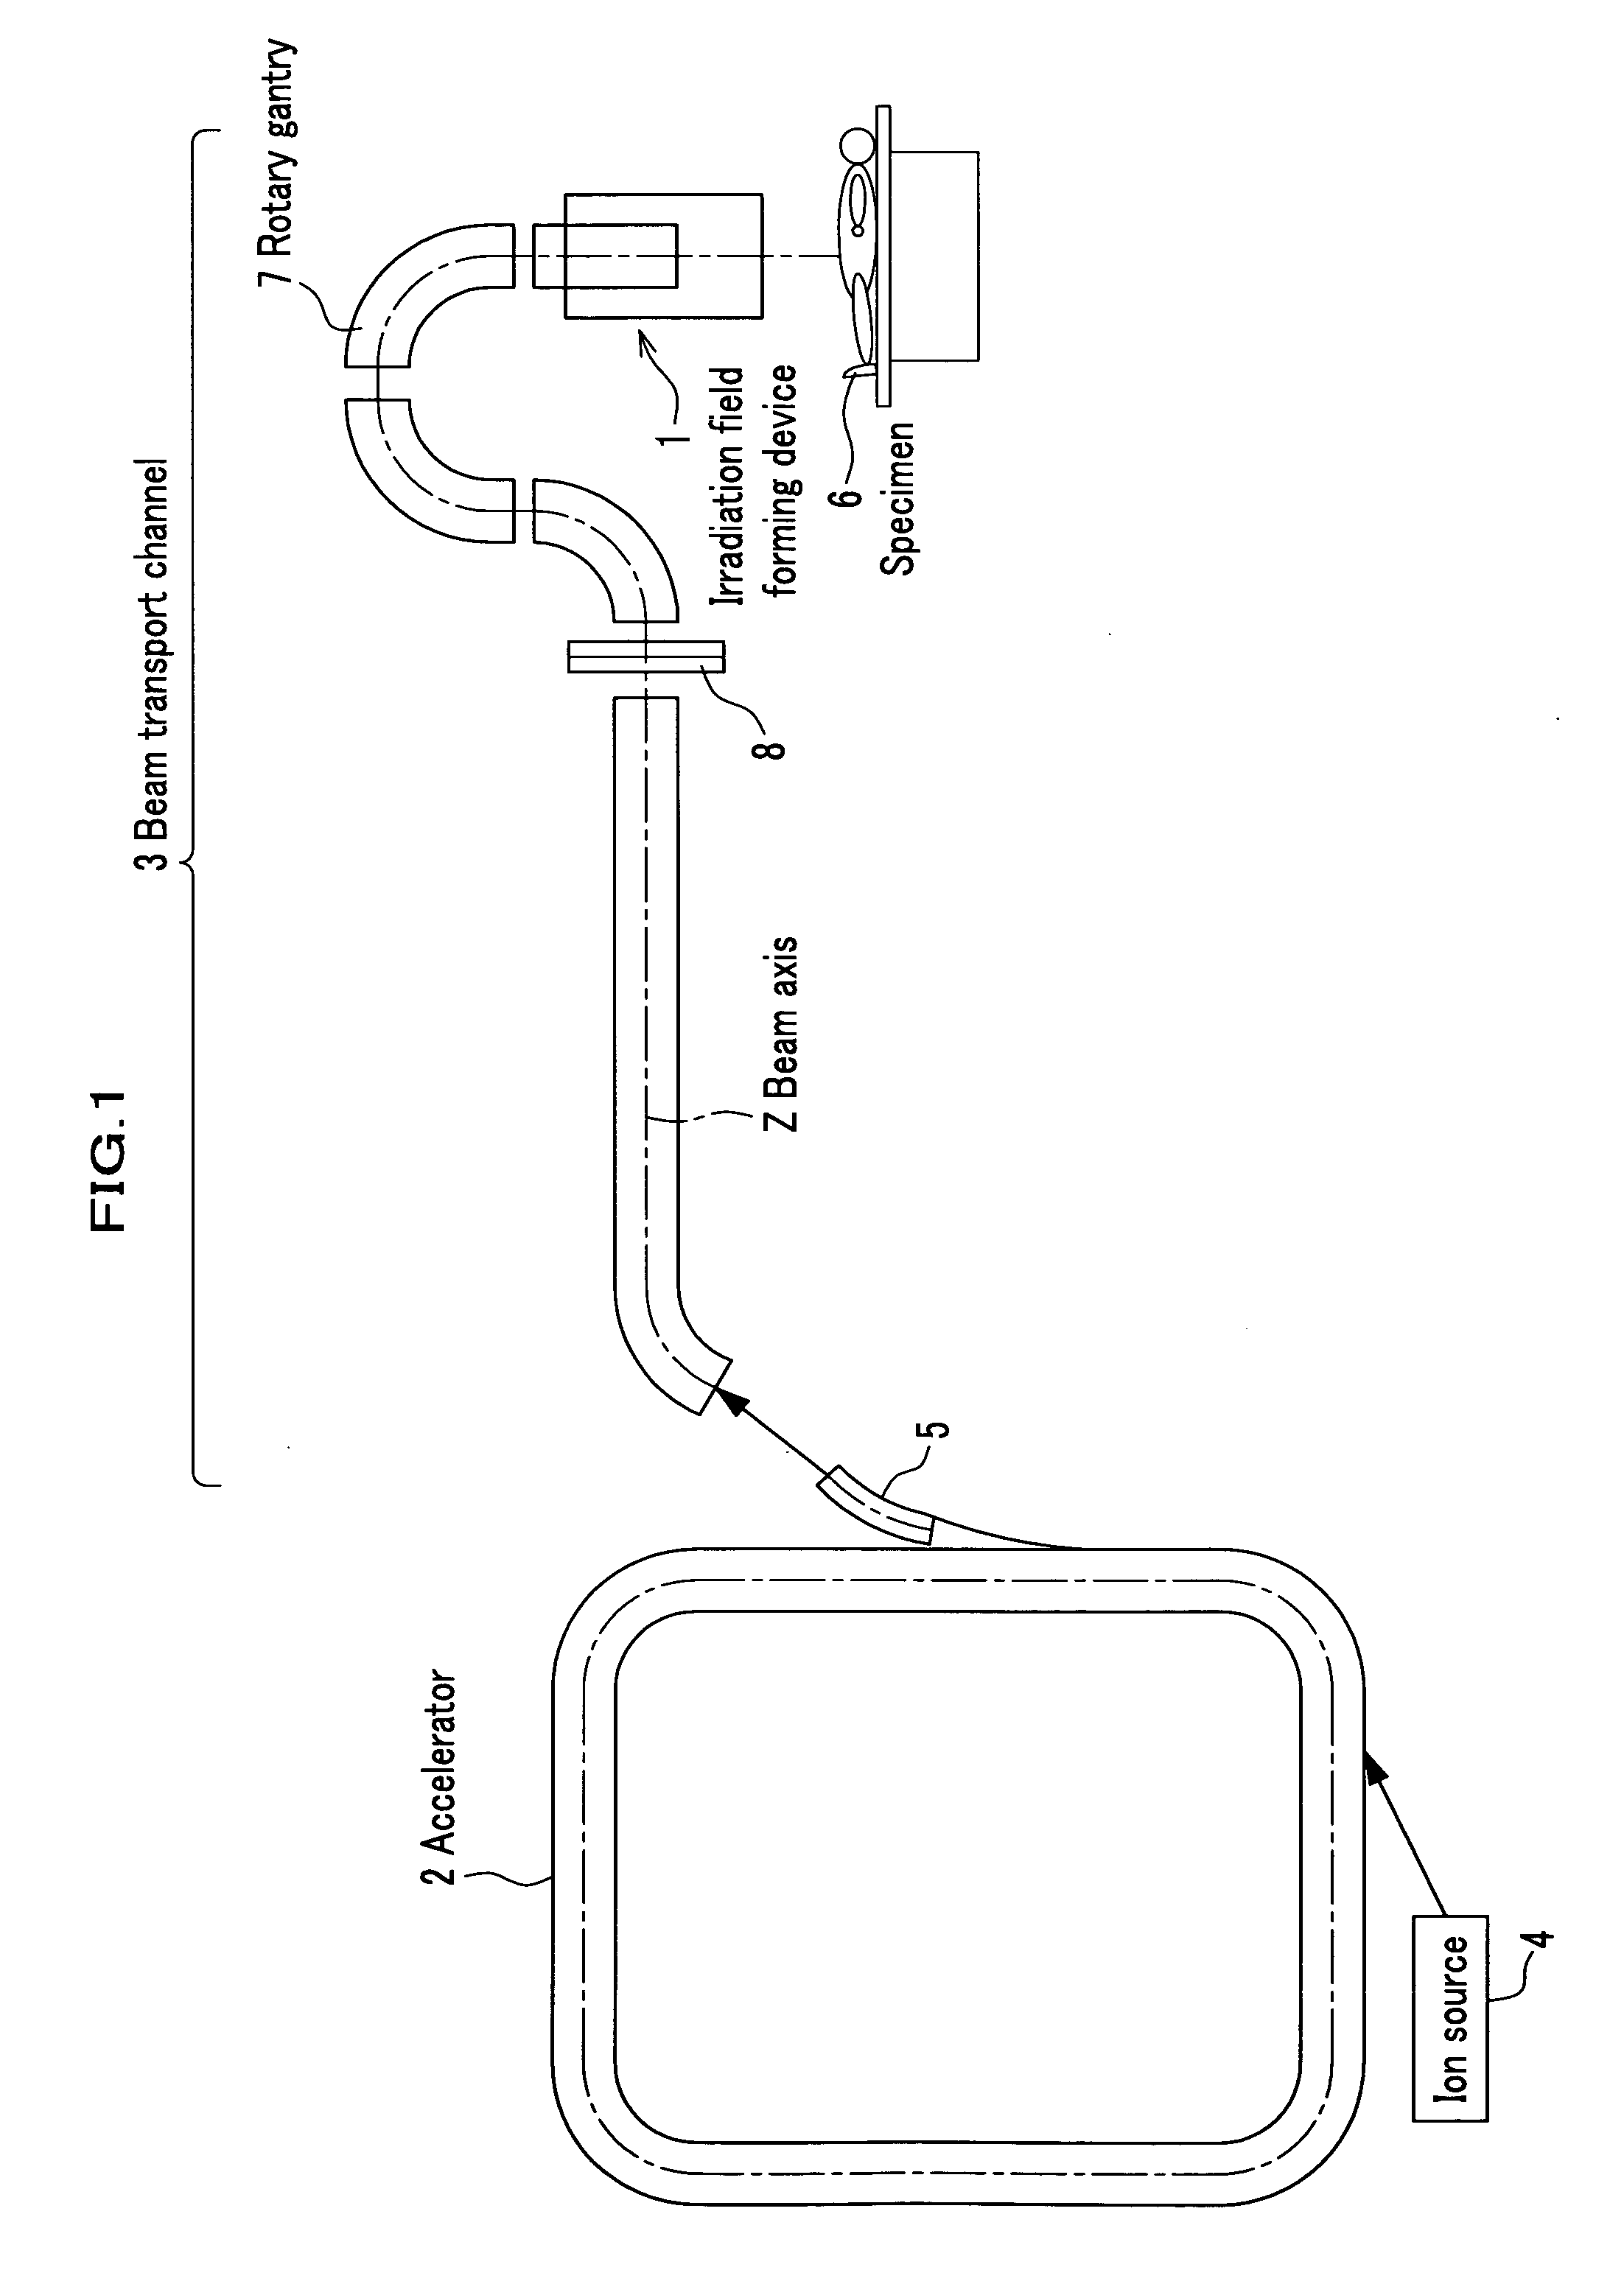 Irradiation Field Forming Device